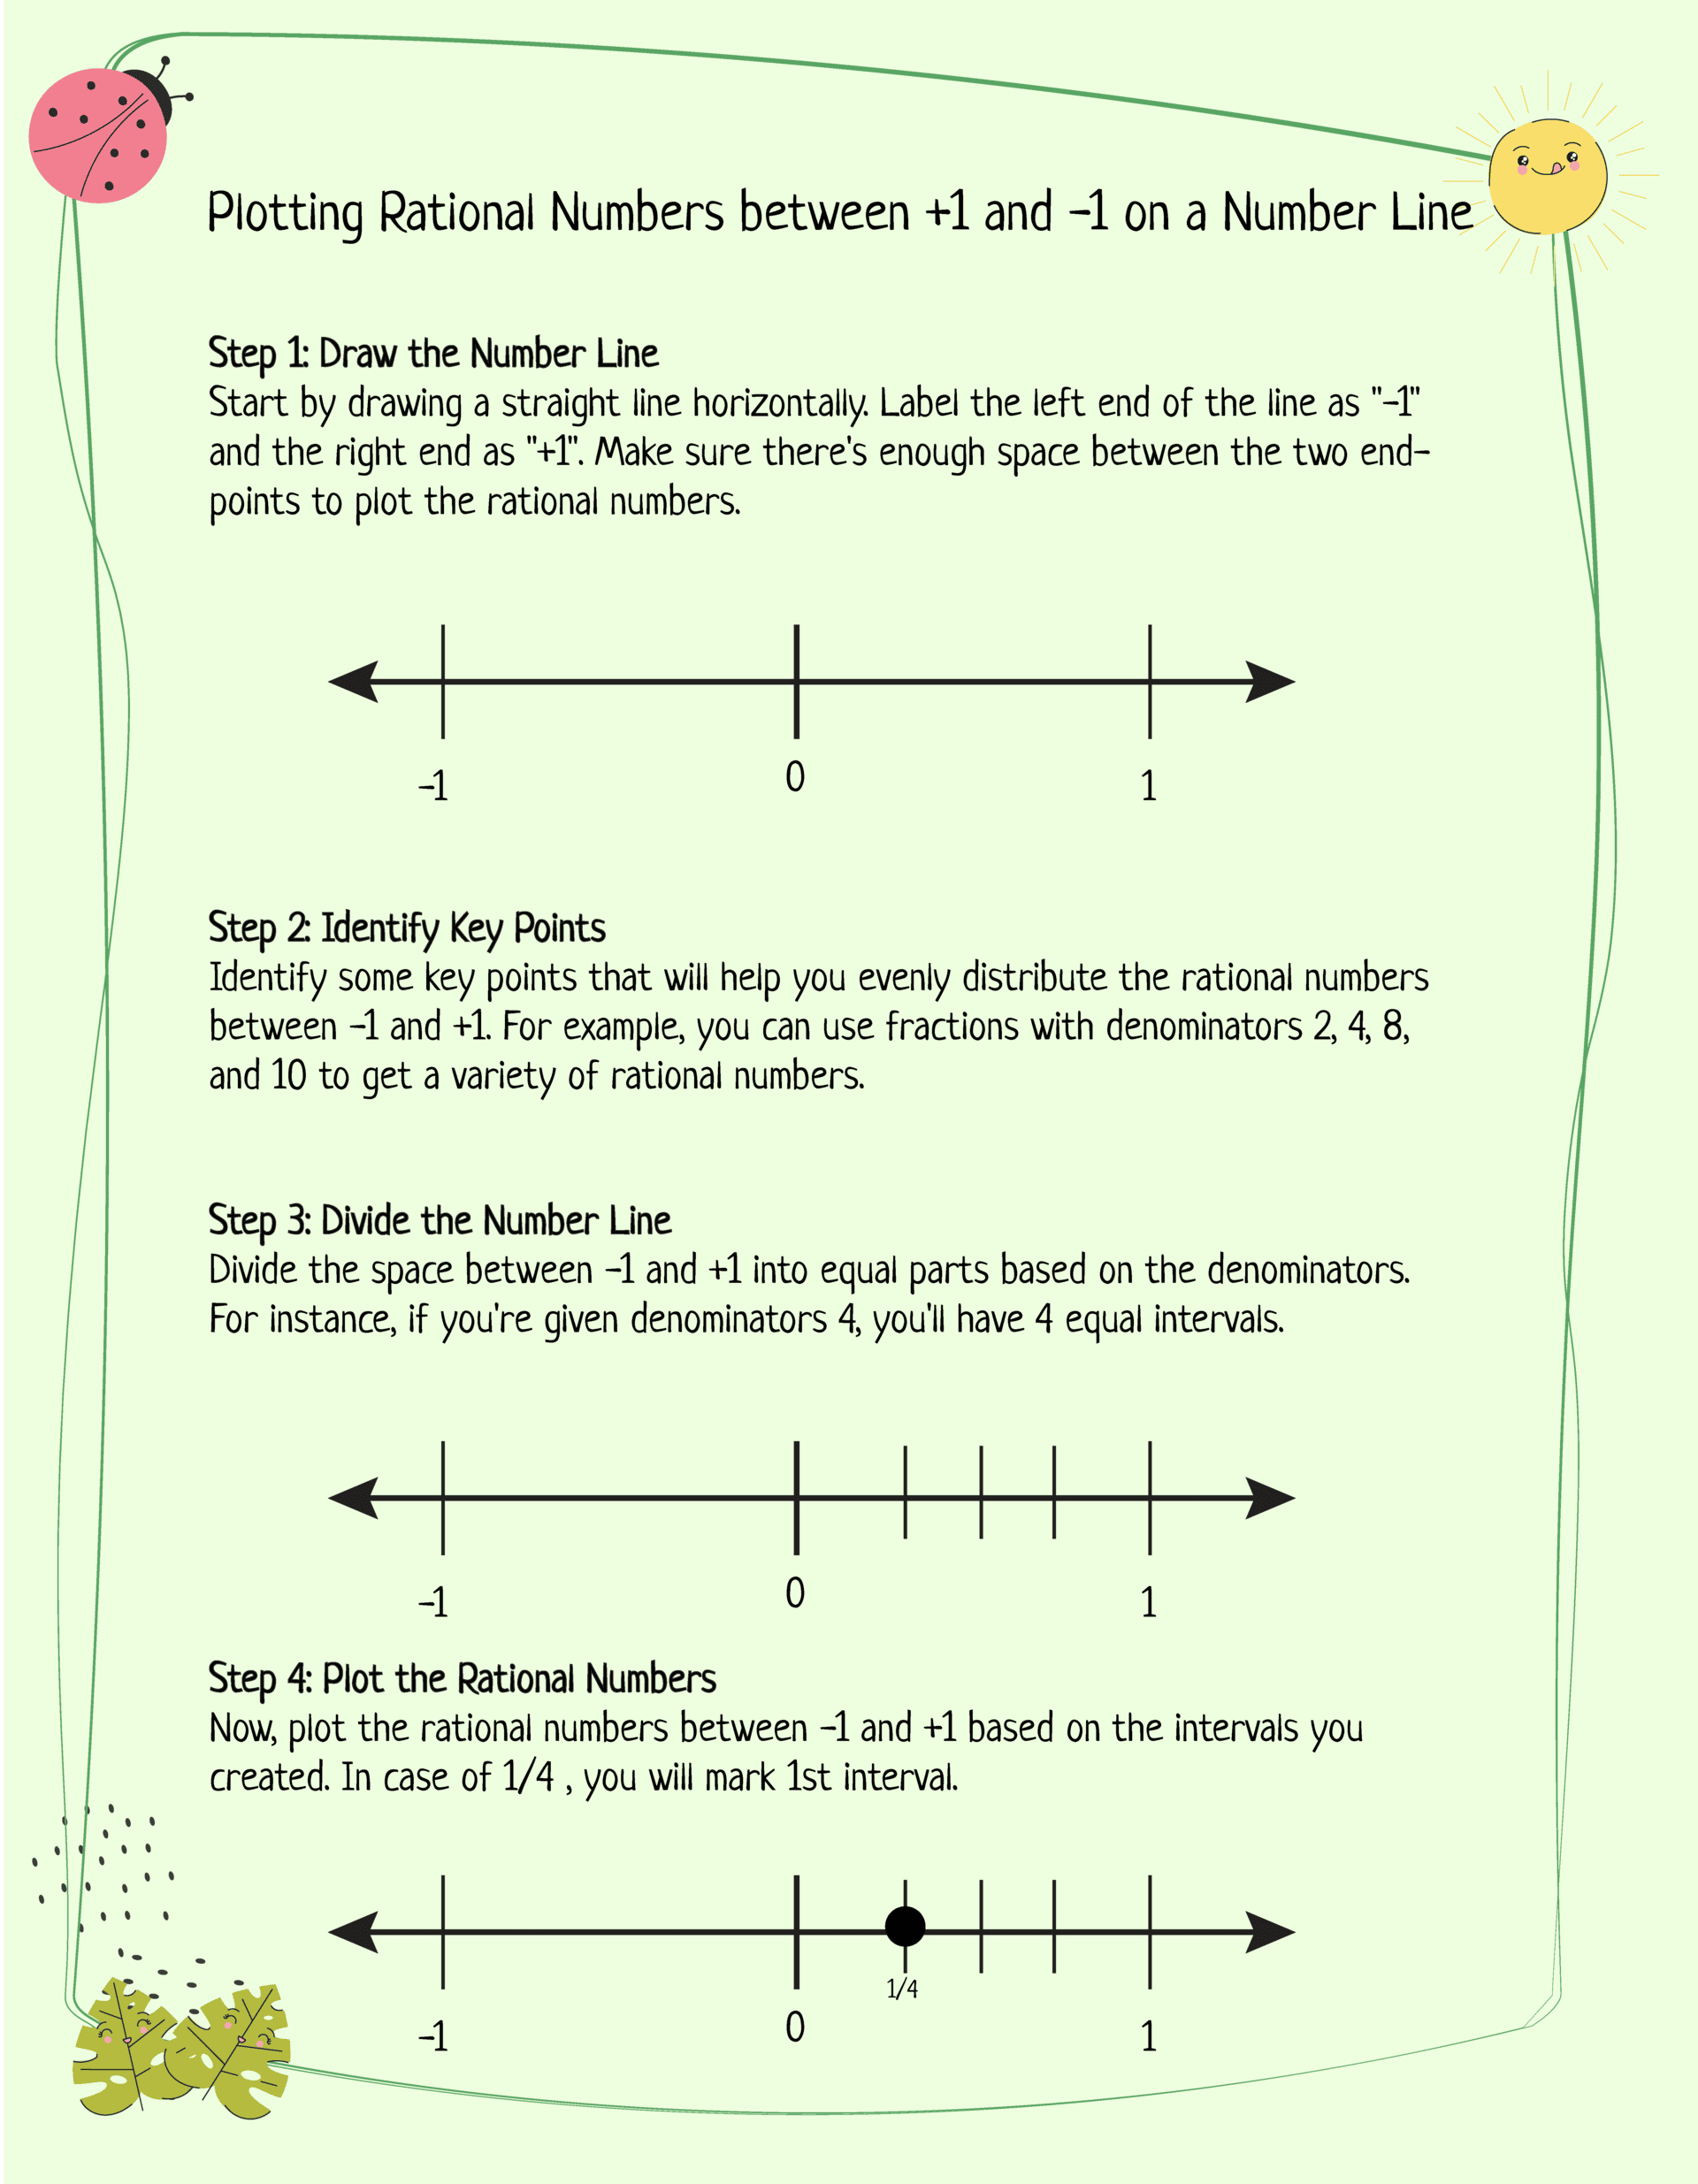 Steps of Plotting Rational Numbers between +1 and -1 on a Number Line-01